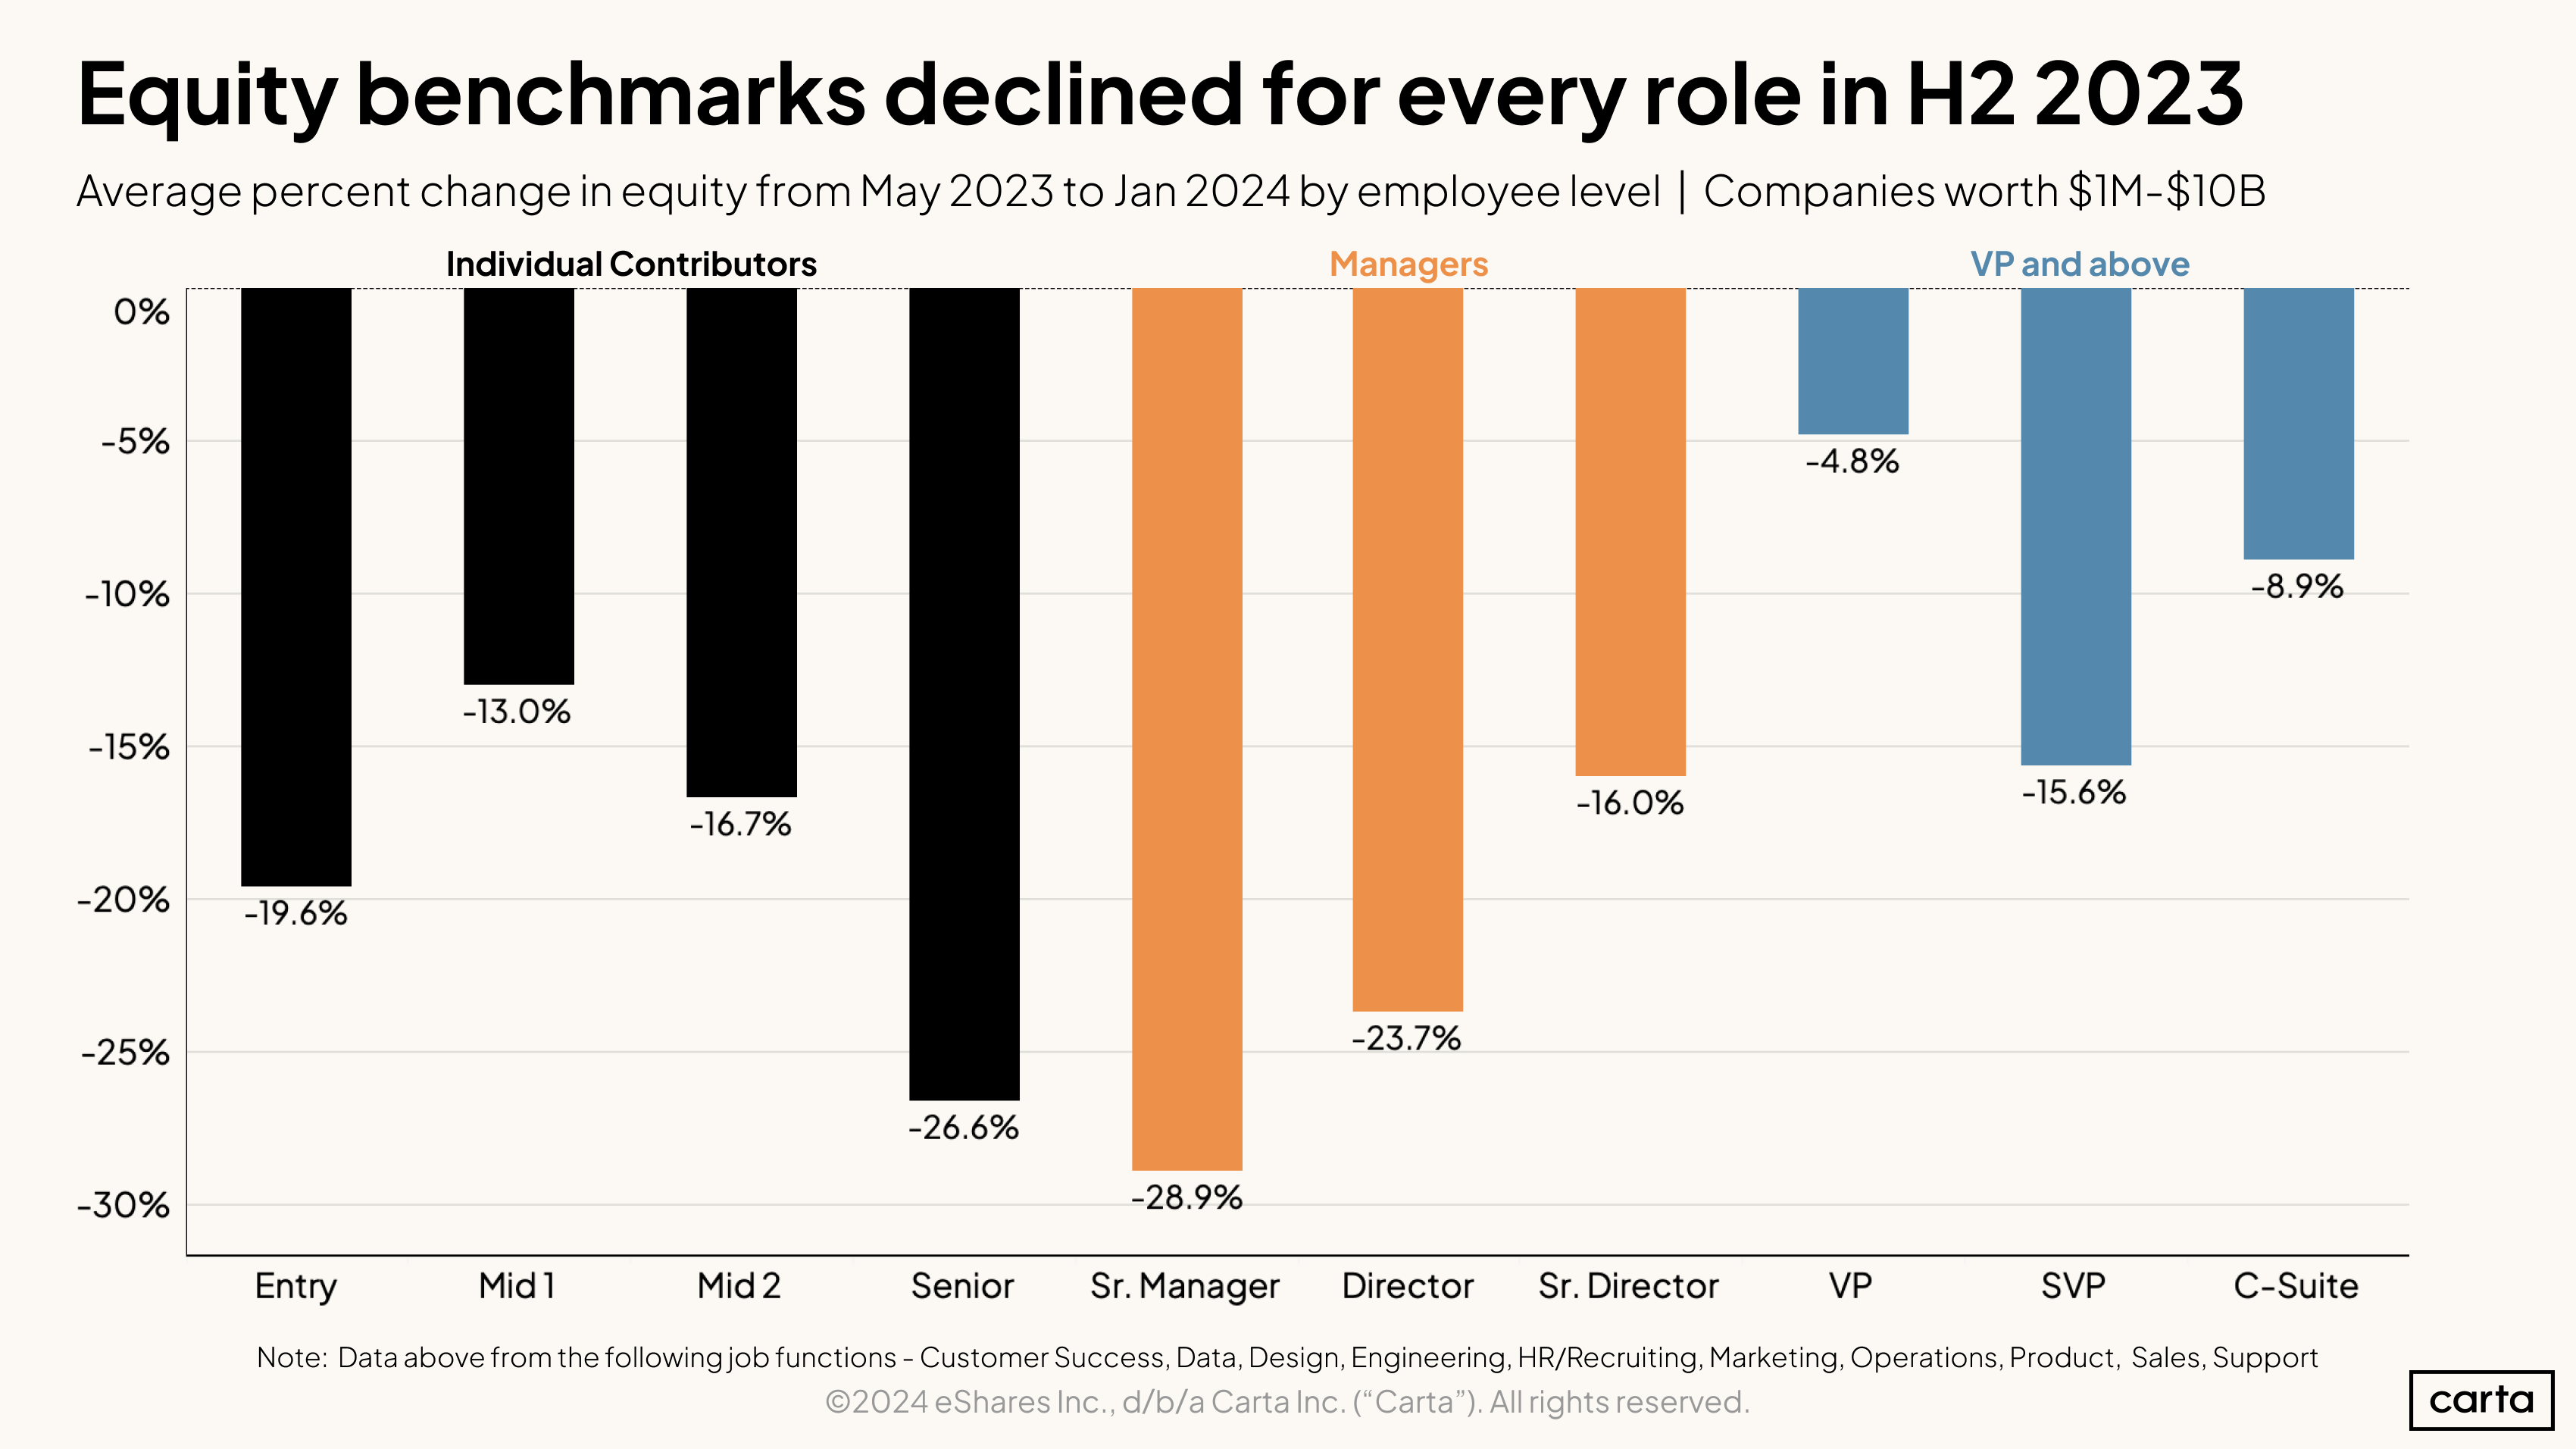 Equity benchmarks declined for every role in H2 2023